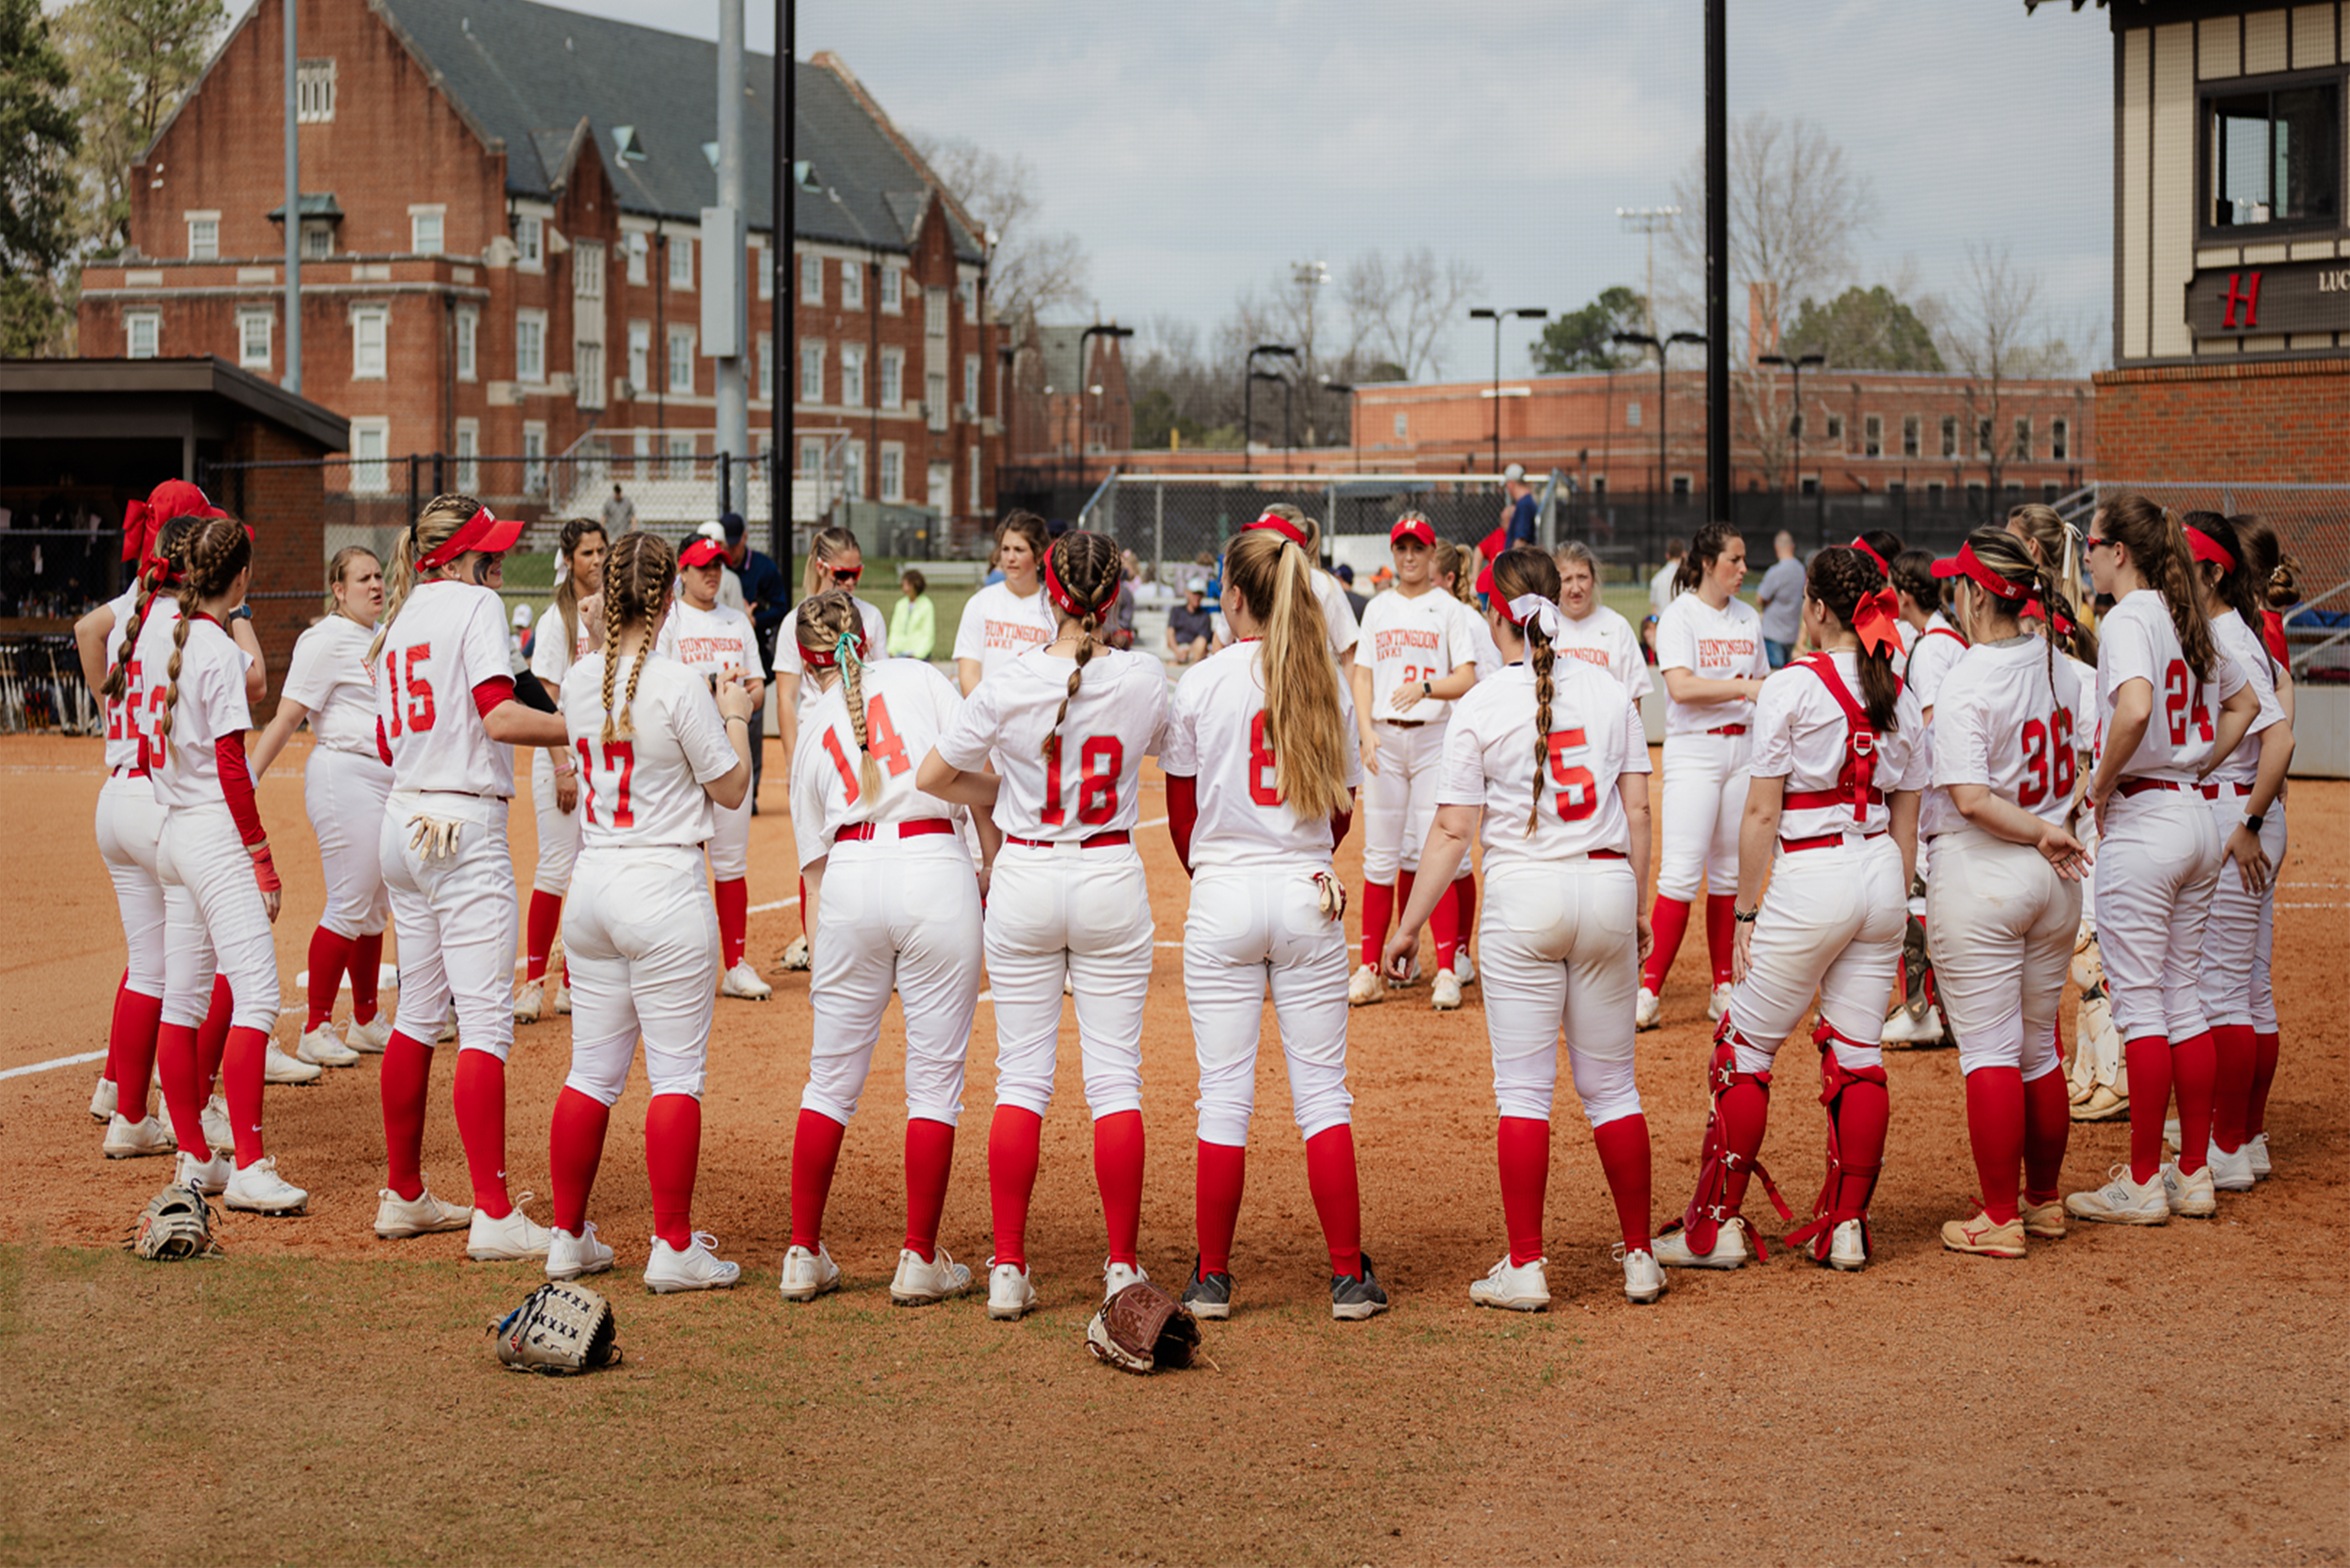 Hawks Softball Ranked 22nd in NFCA Division III Coaches Poll